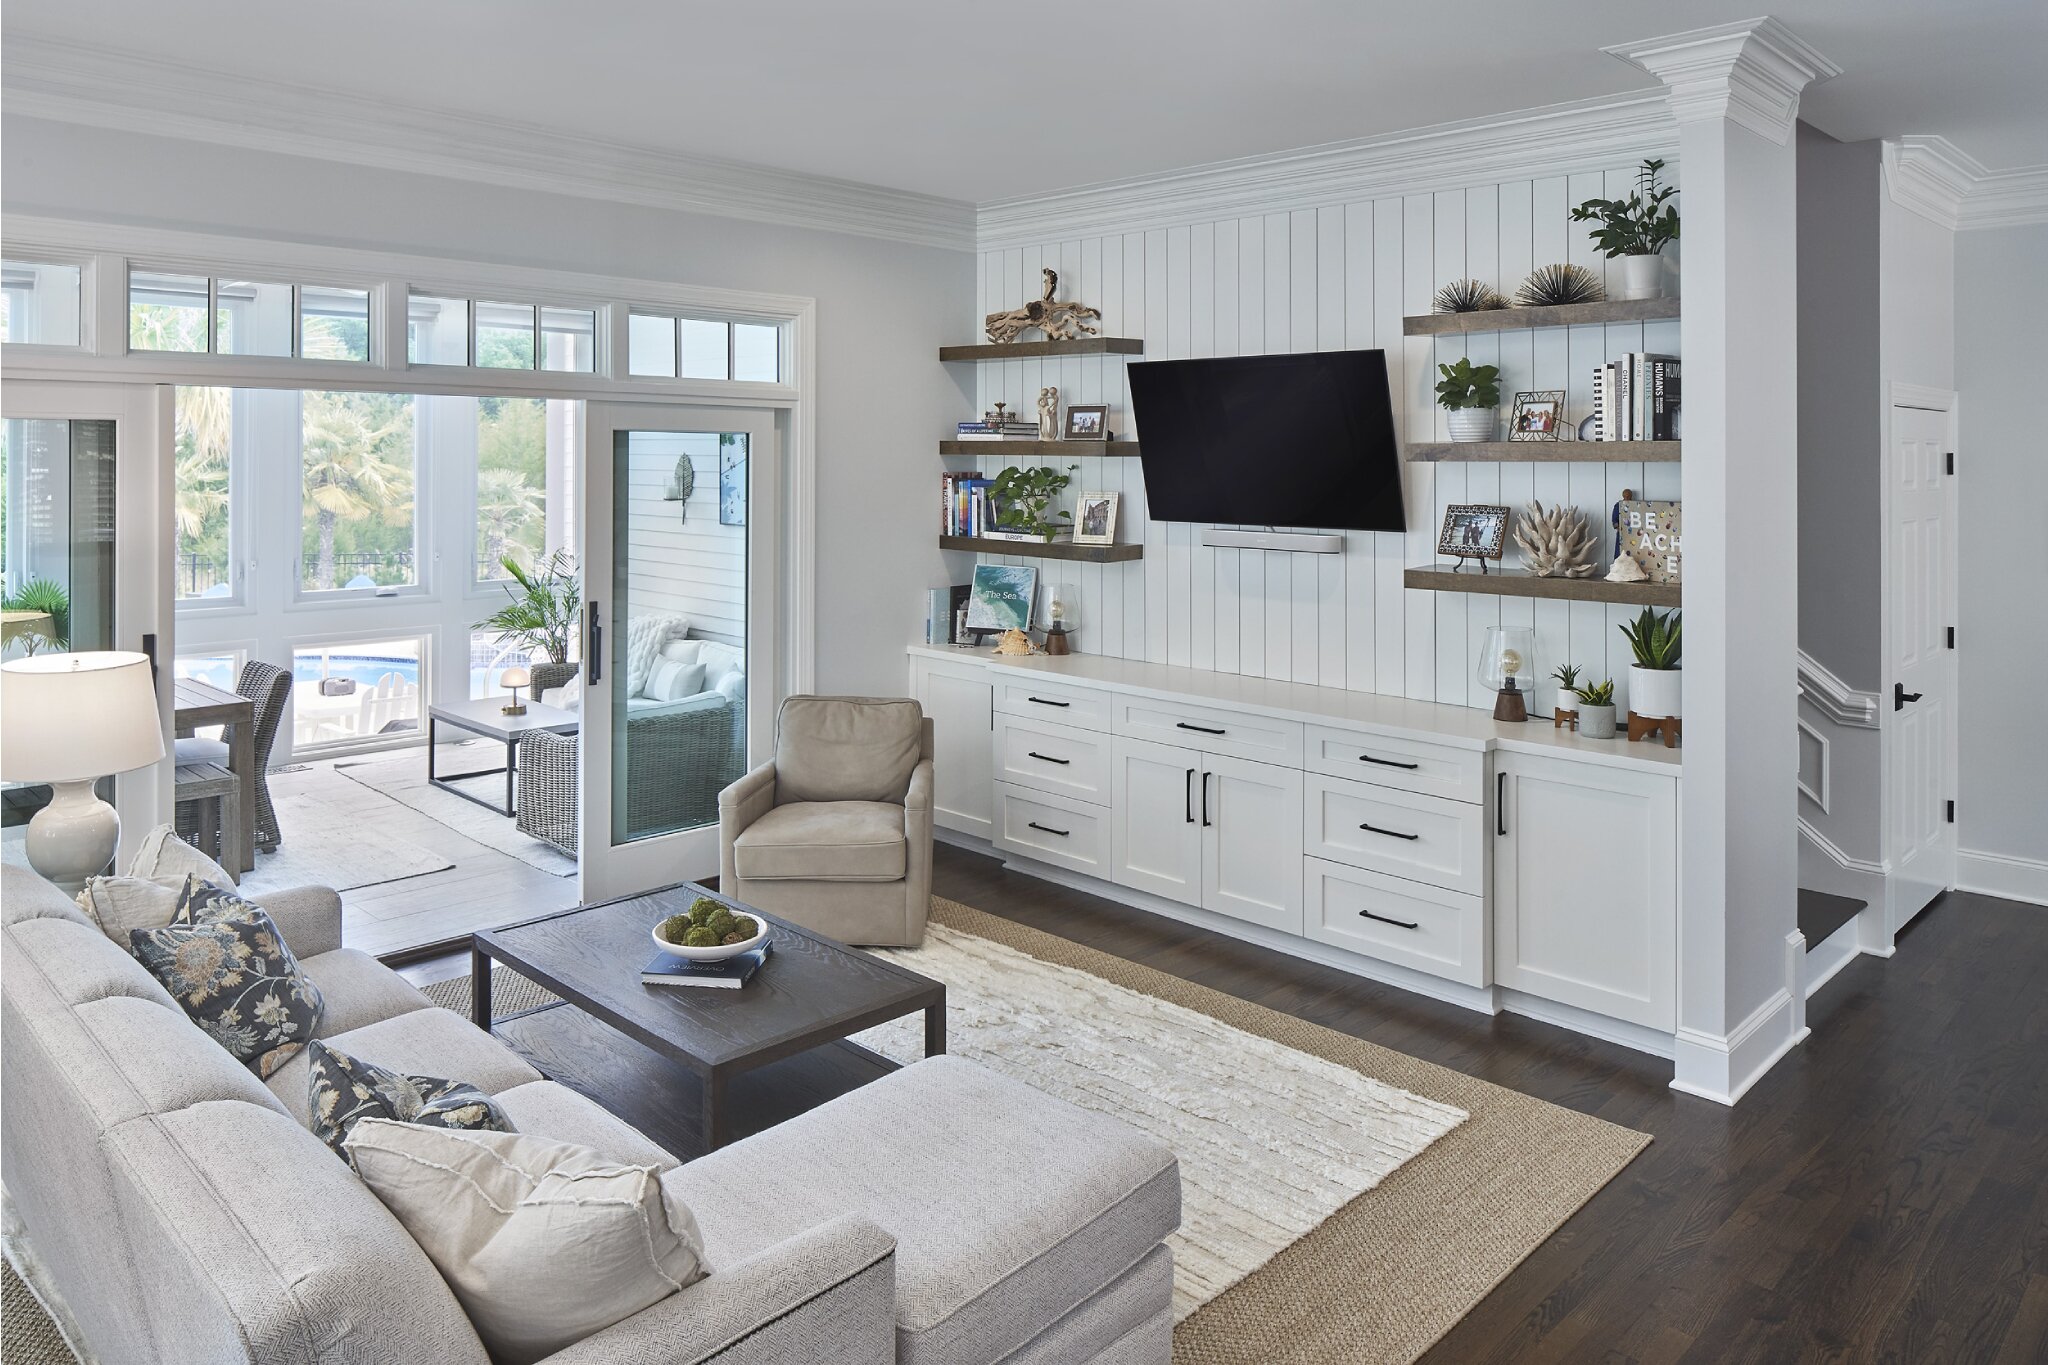 Light and bright coastal living room with white shiplap walls, custom built-in media storage, and large glass sliding doors into sunroom